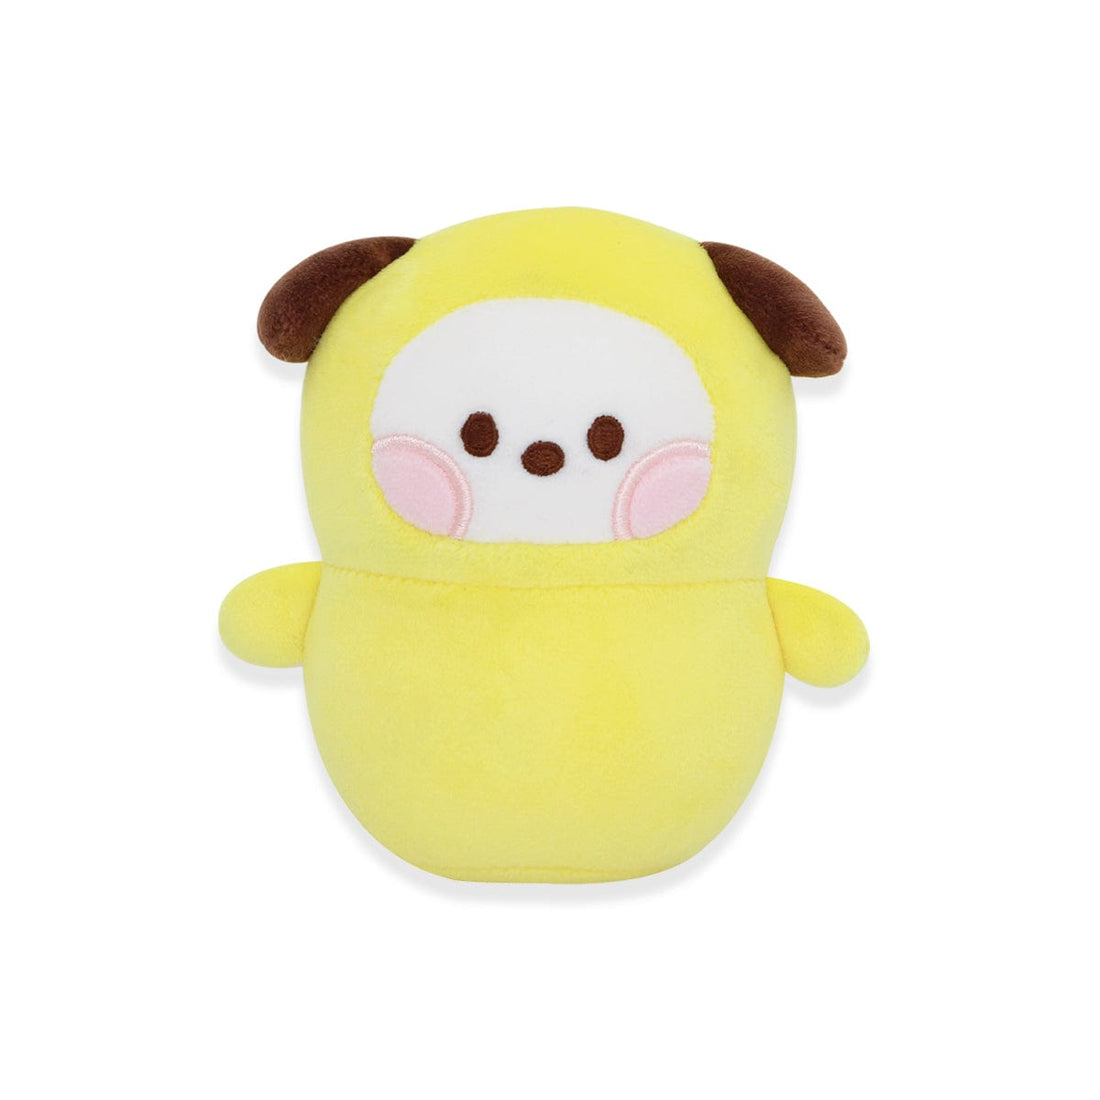 LINE FRIENDS LIVING CHIMMY BT21 CHIMMY minini ROLYPOLY STANDING DOLL